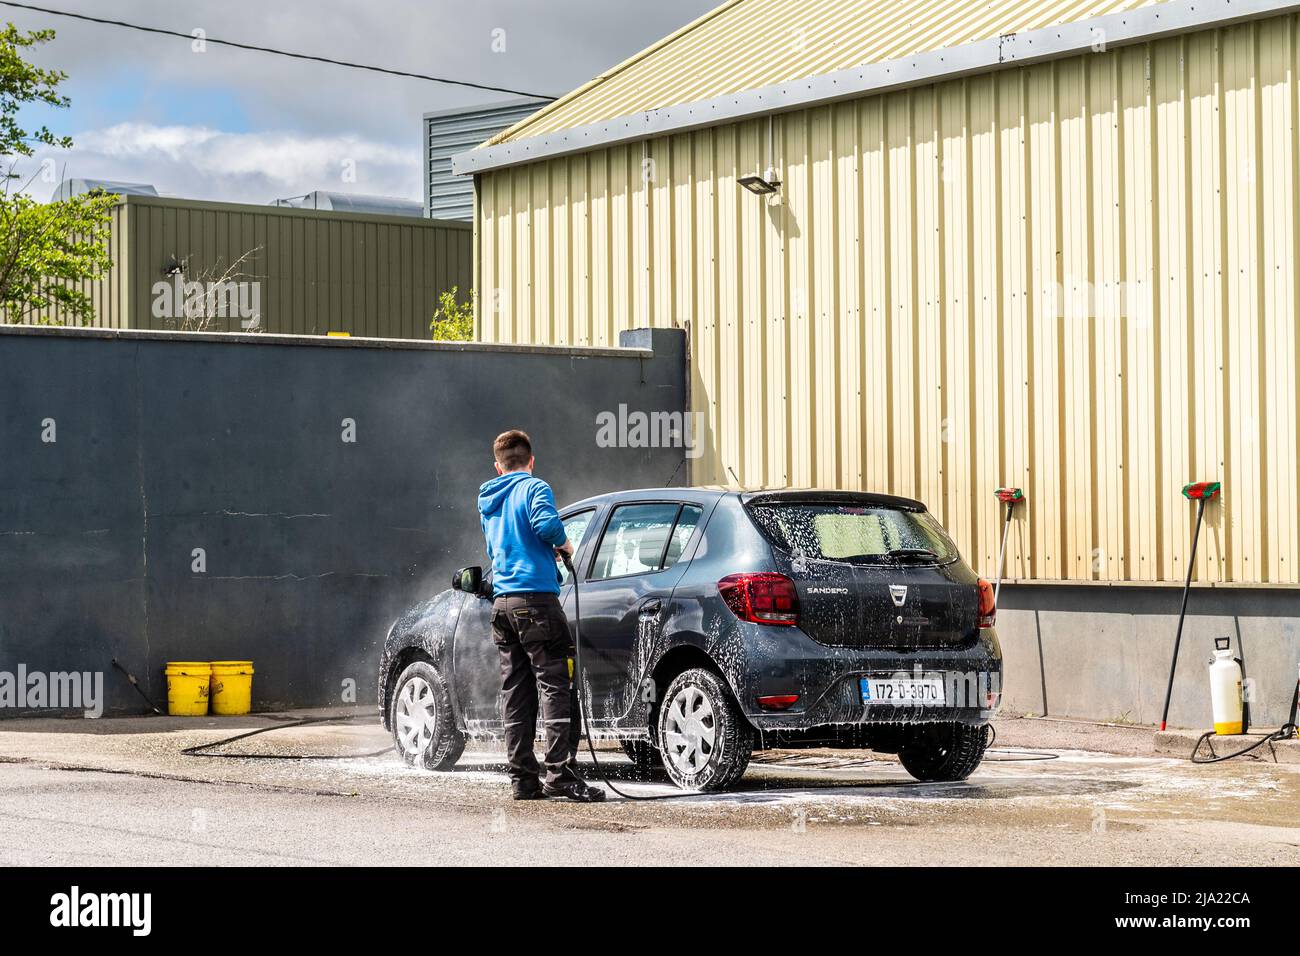 Man washing car at a commercial car wash using a high pressure water hose in Ireland. Stock Photo